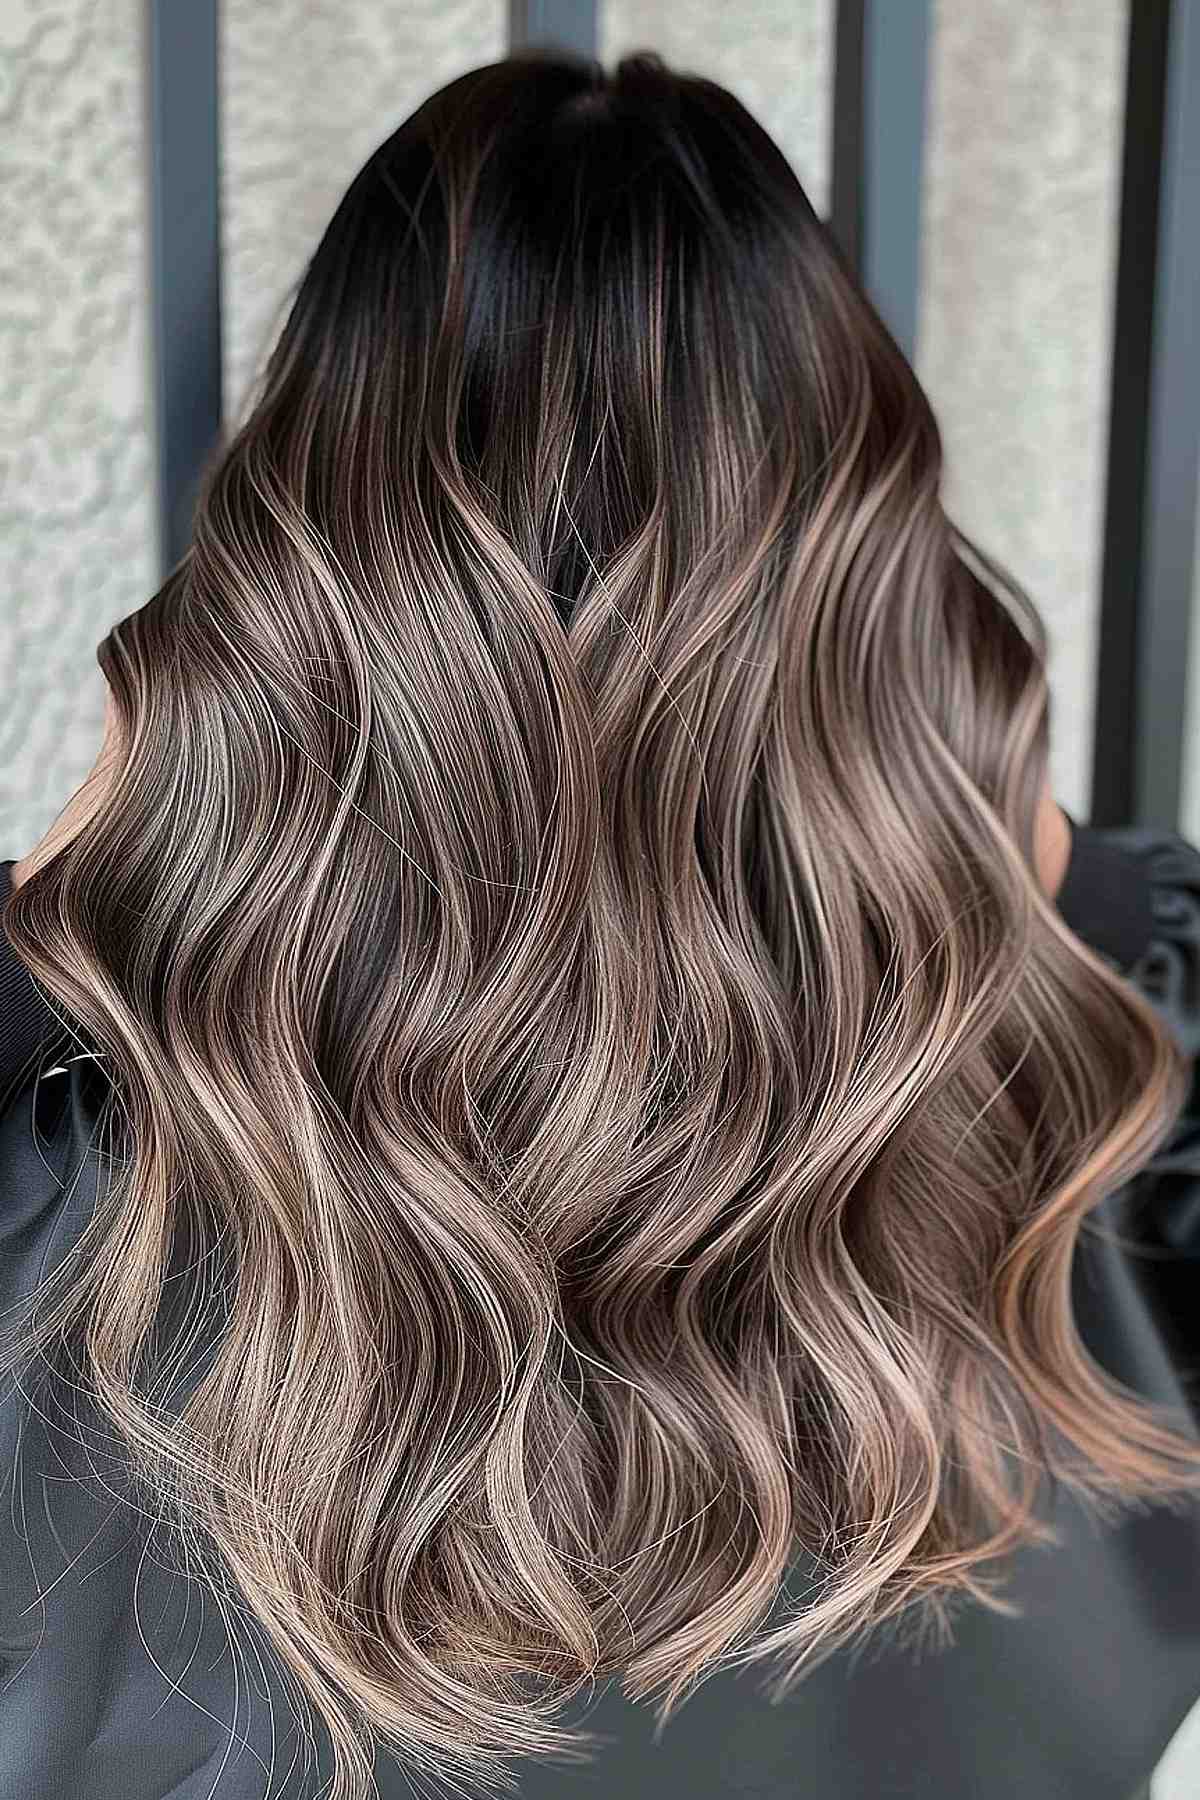 Luxurious long waves in mushroom brown with dark roots, featuring a balayage technique that enhances the hair's natural volume and depth.